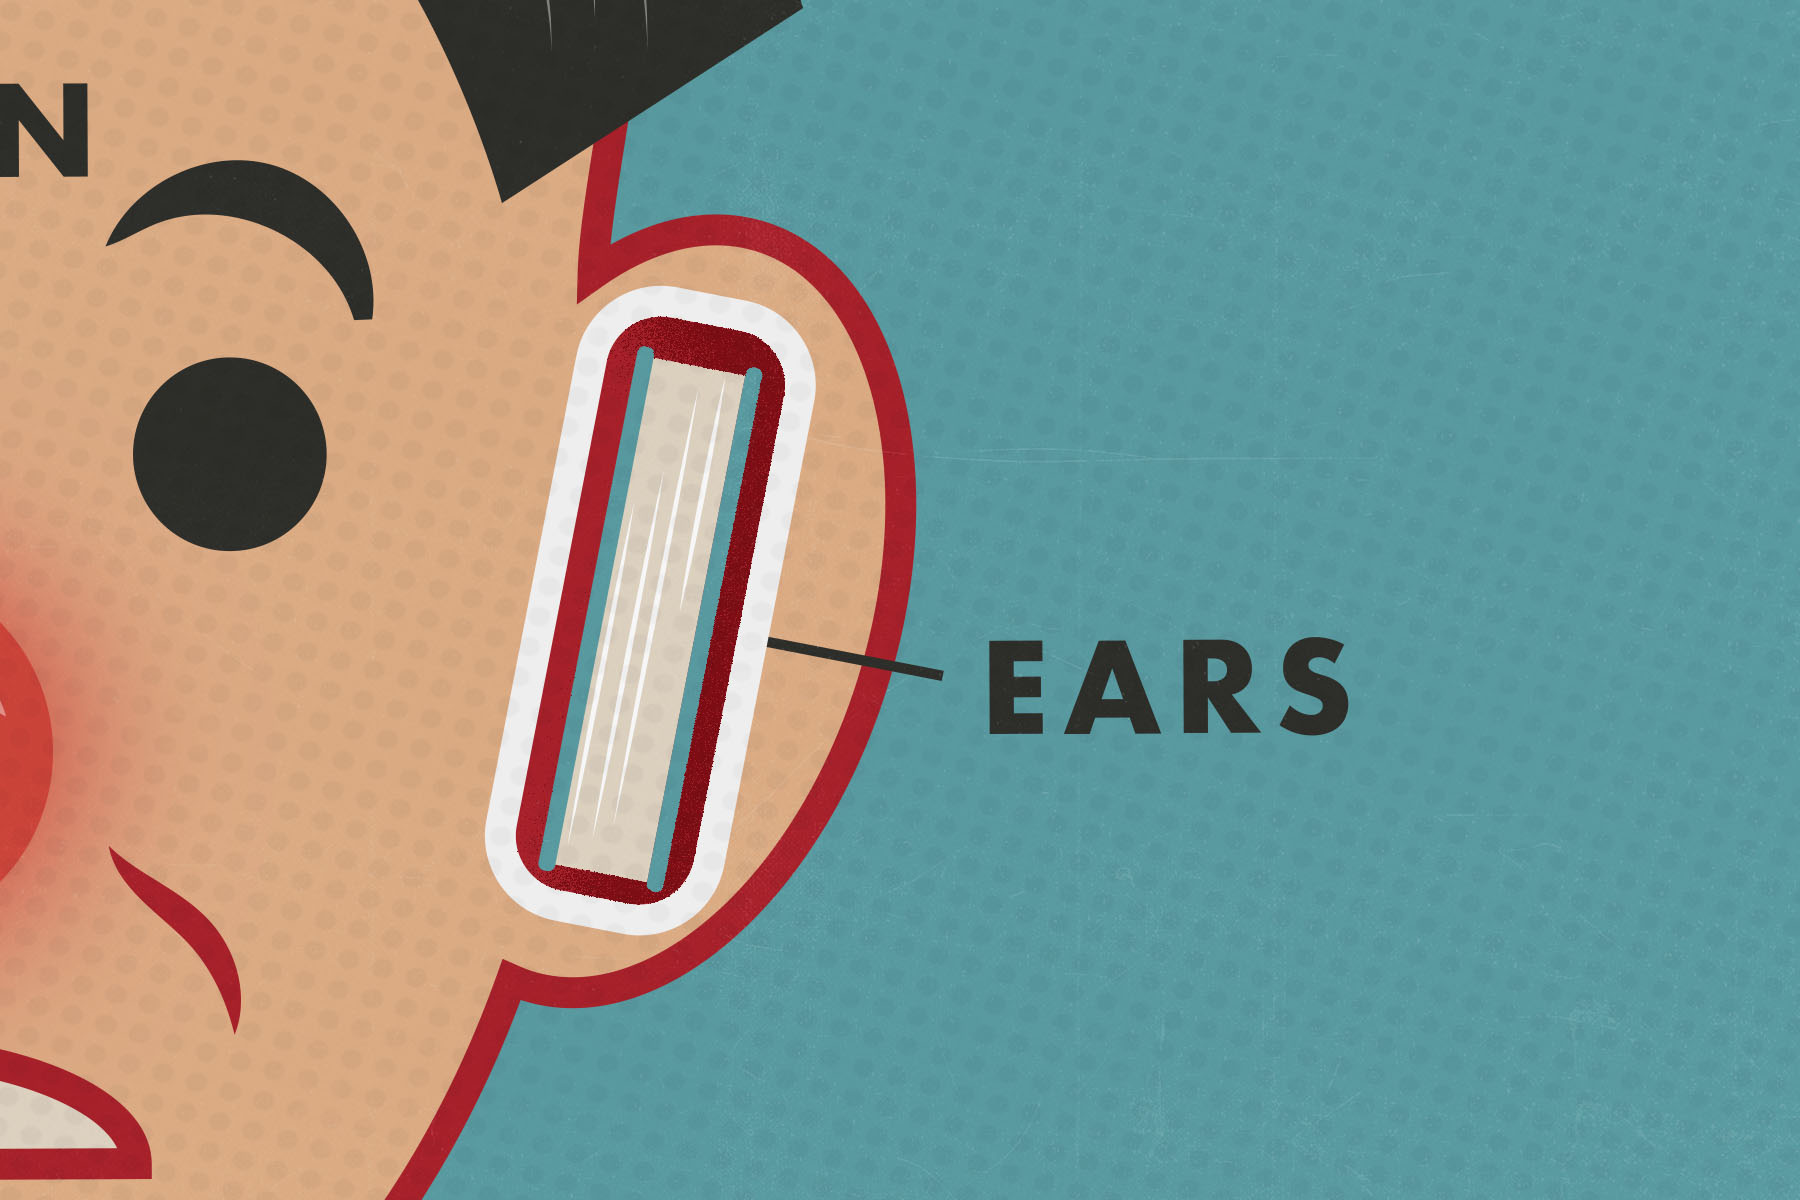 A boardgame-style illustration of ears